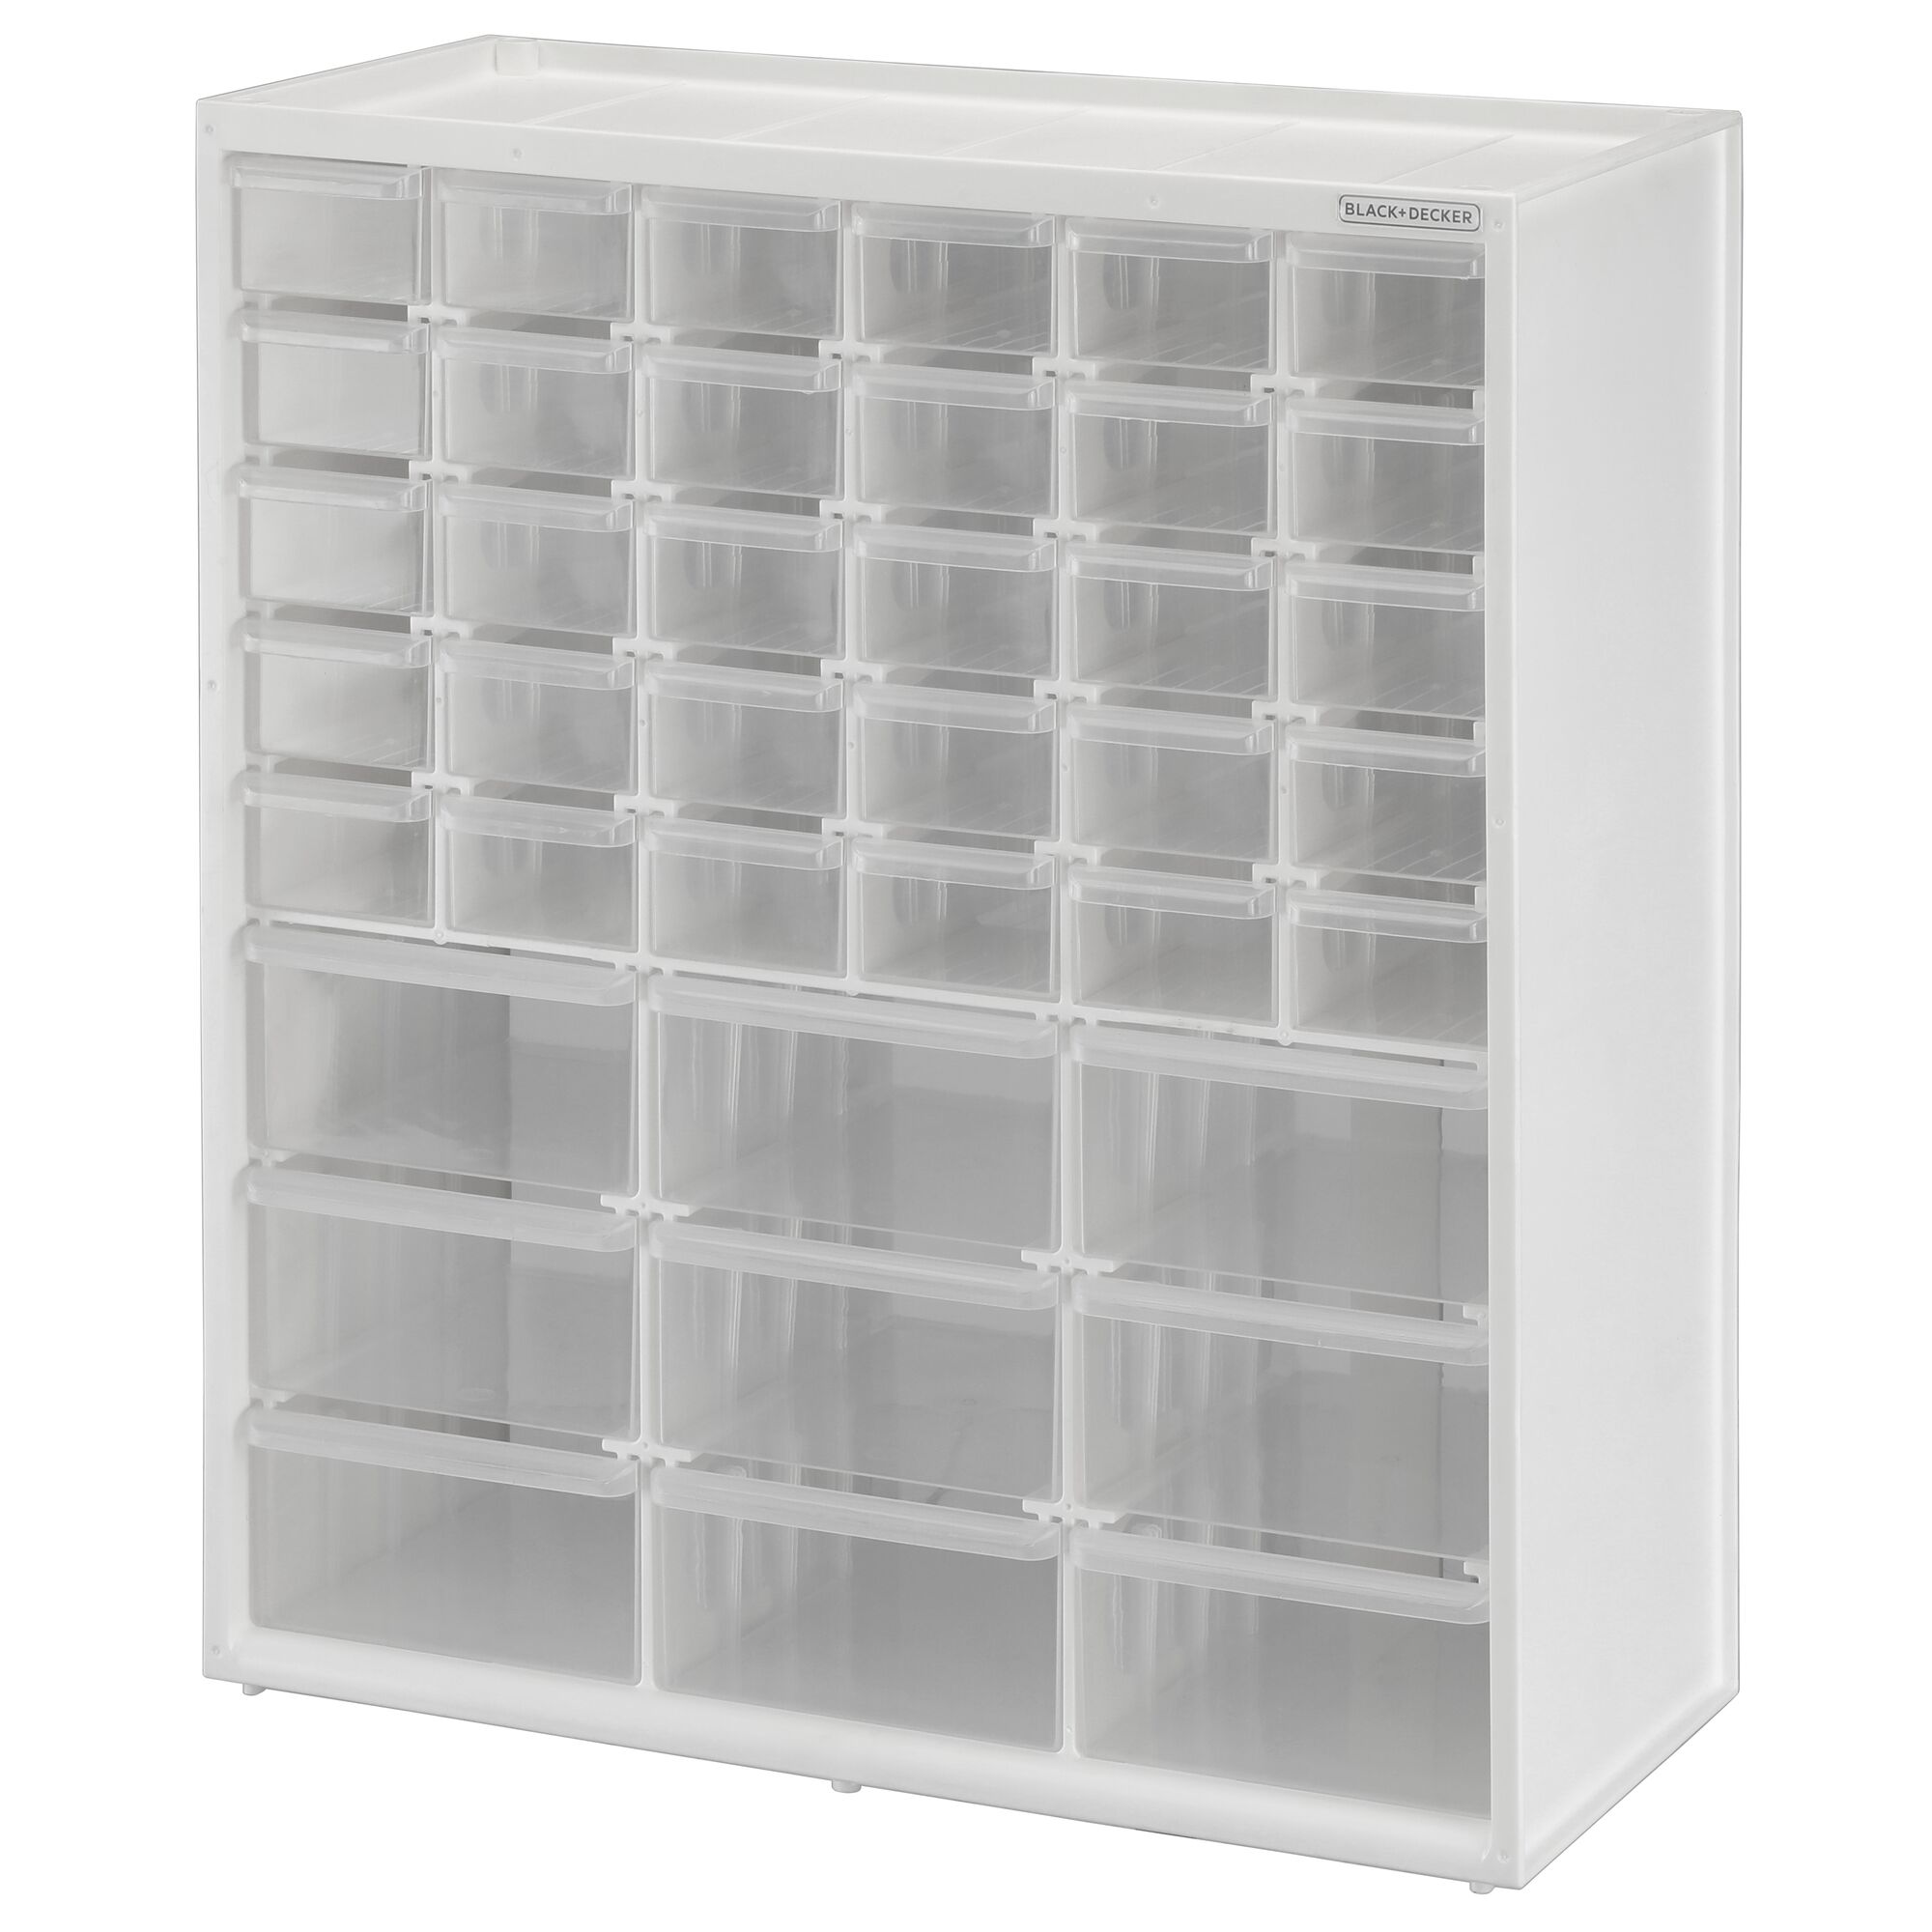 Black and decker Large & Small 39 Drawer Bin System with clear drawers